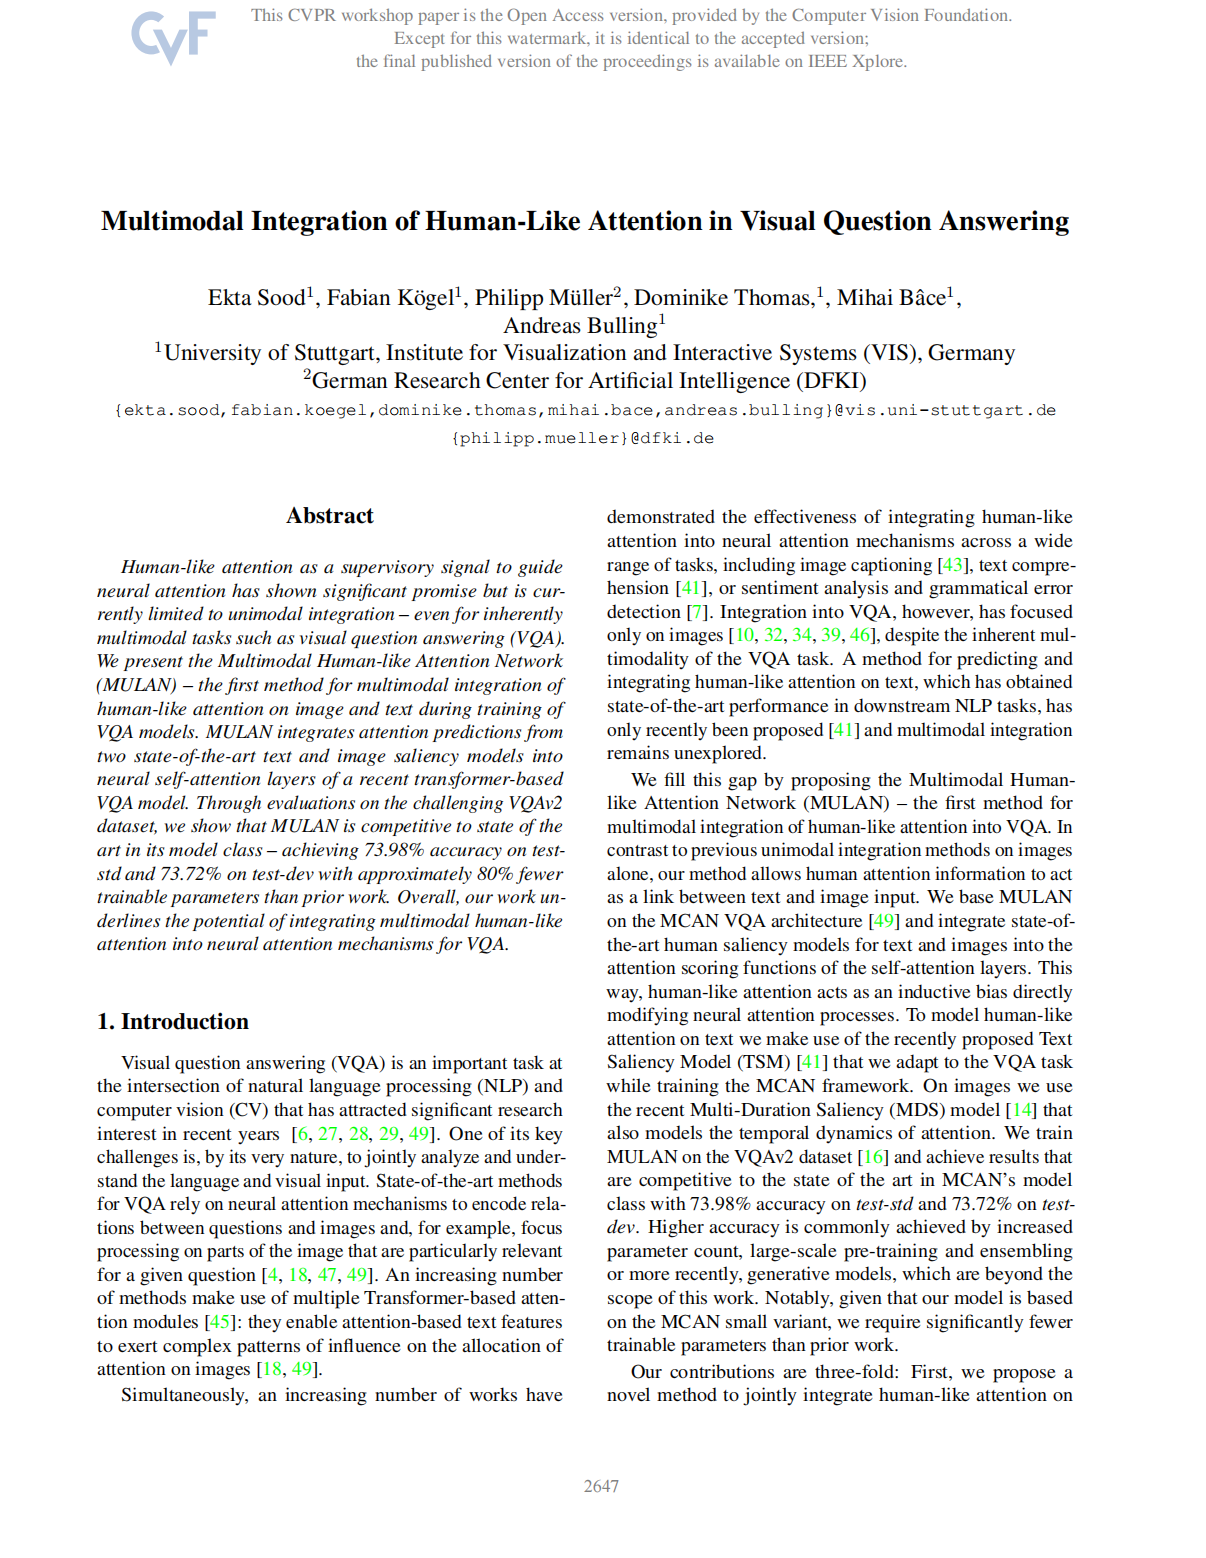 Multimodal Integration of Human-Like Attention in Visual Question Answering